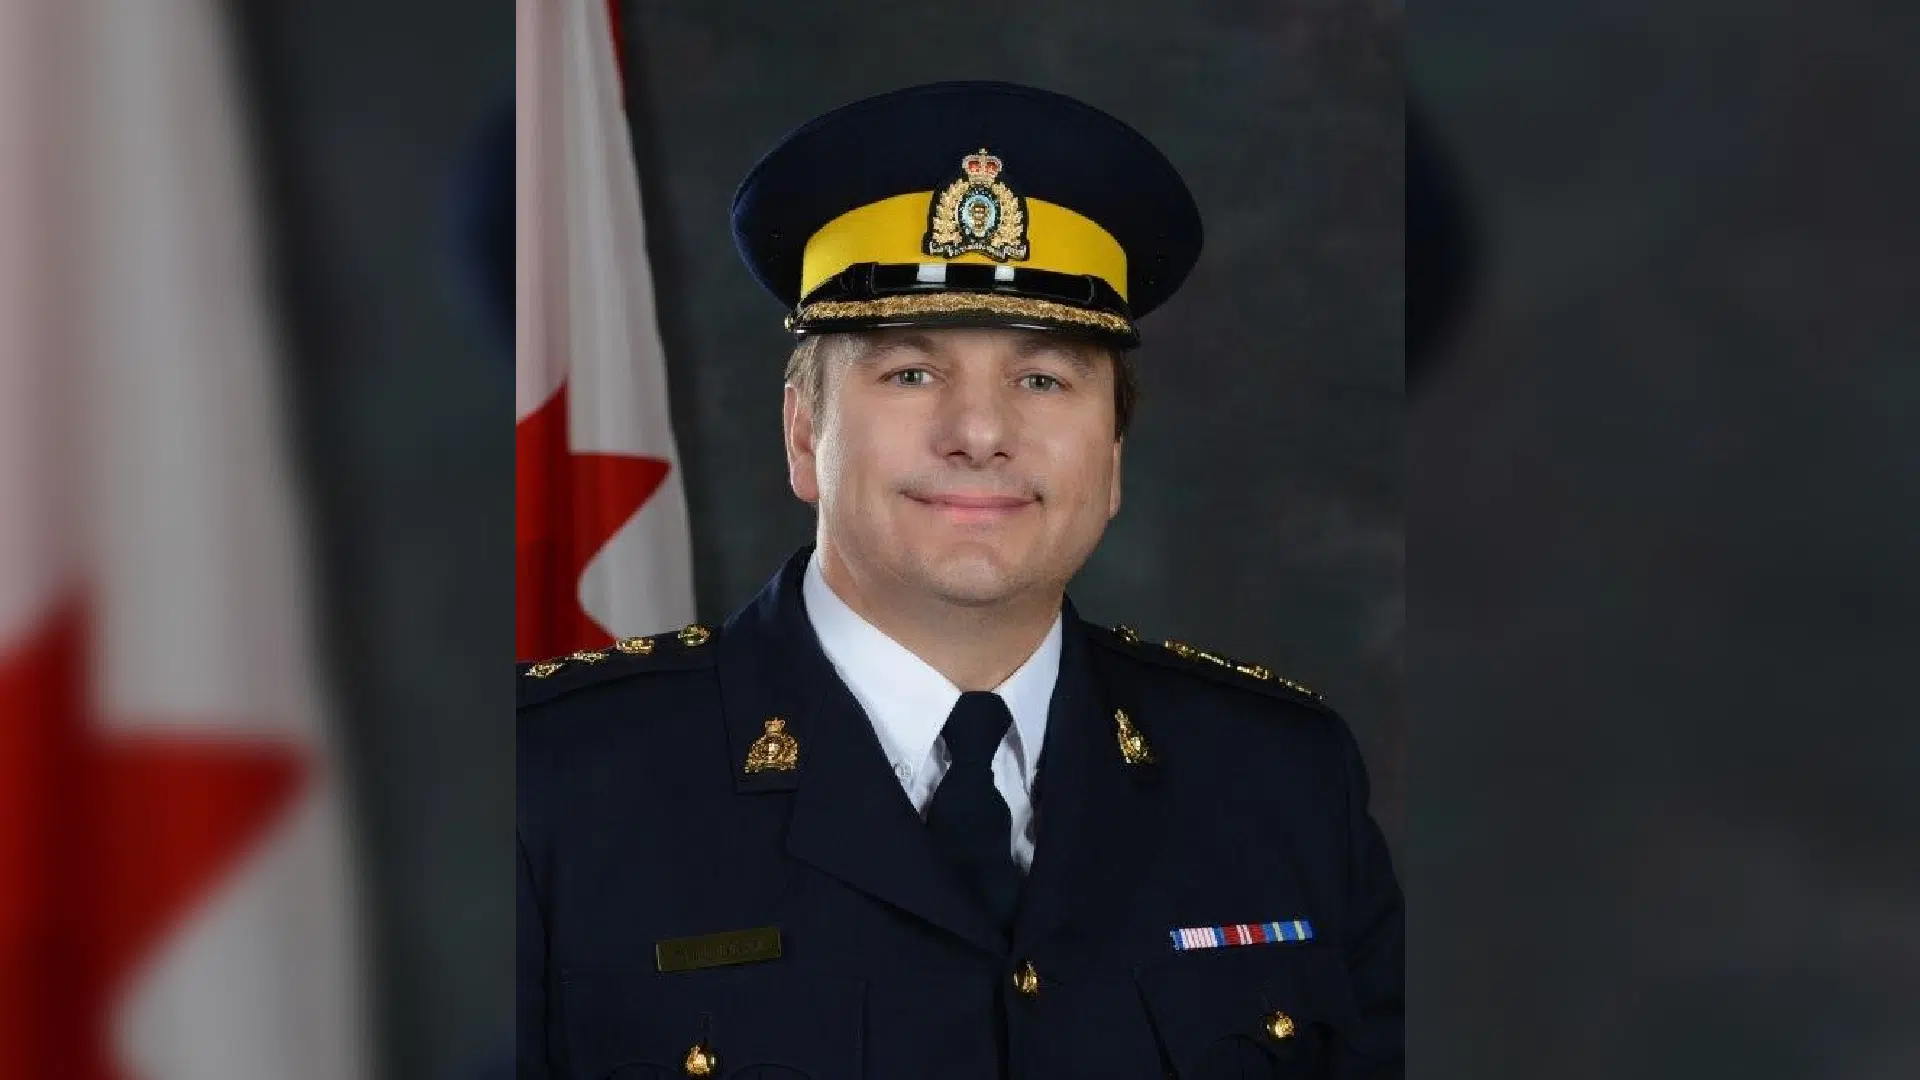 UPDATED: Saint John’s Police Chief Is Resigning